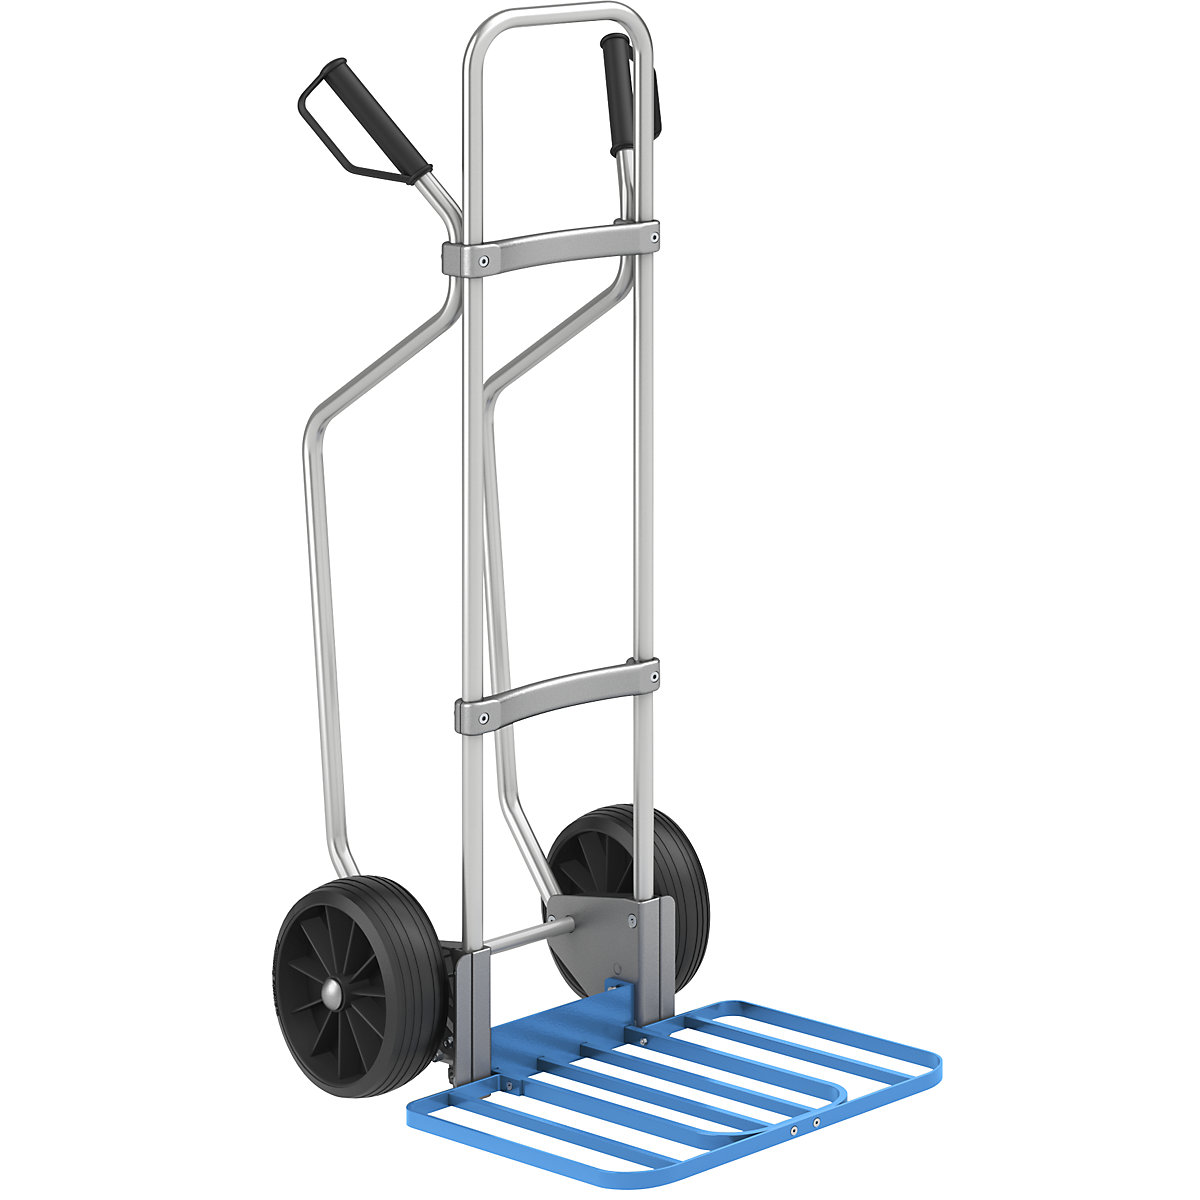 Aluminium sack truck with runners – eurokraft pro, parcel footplate WxD 430 x 450 mm, blue, solid rubber tyres, 5+ items-1